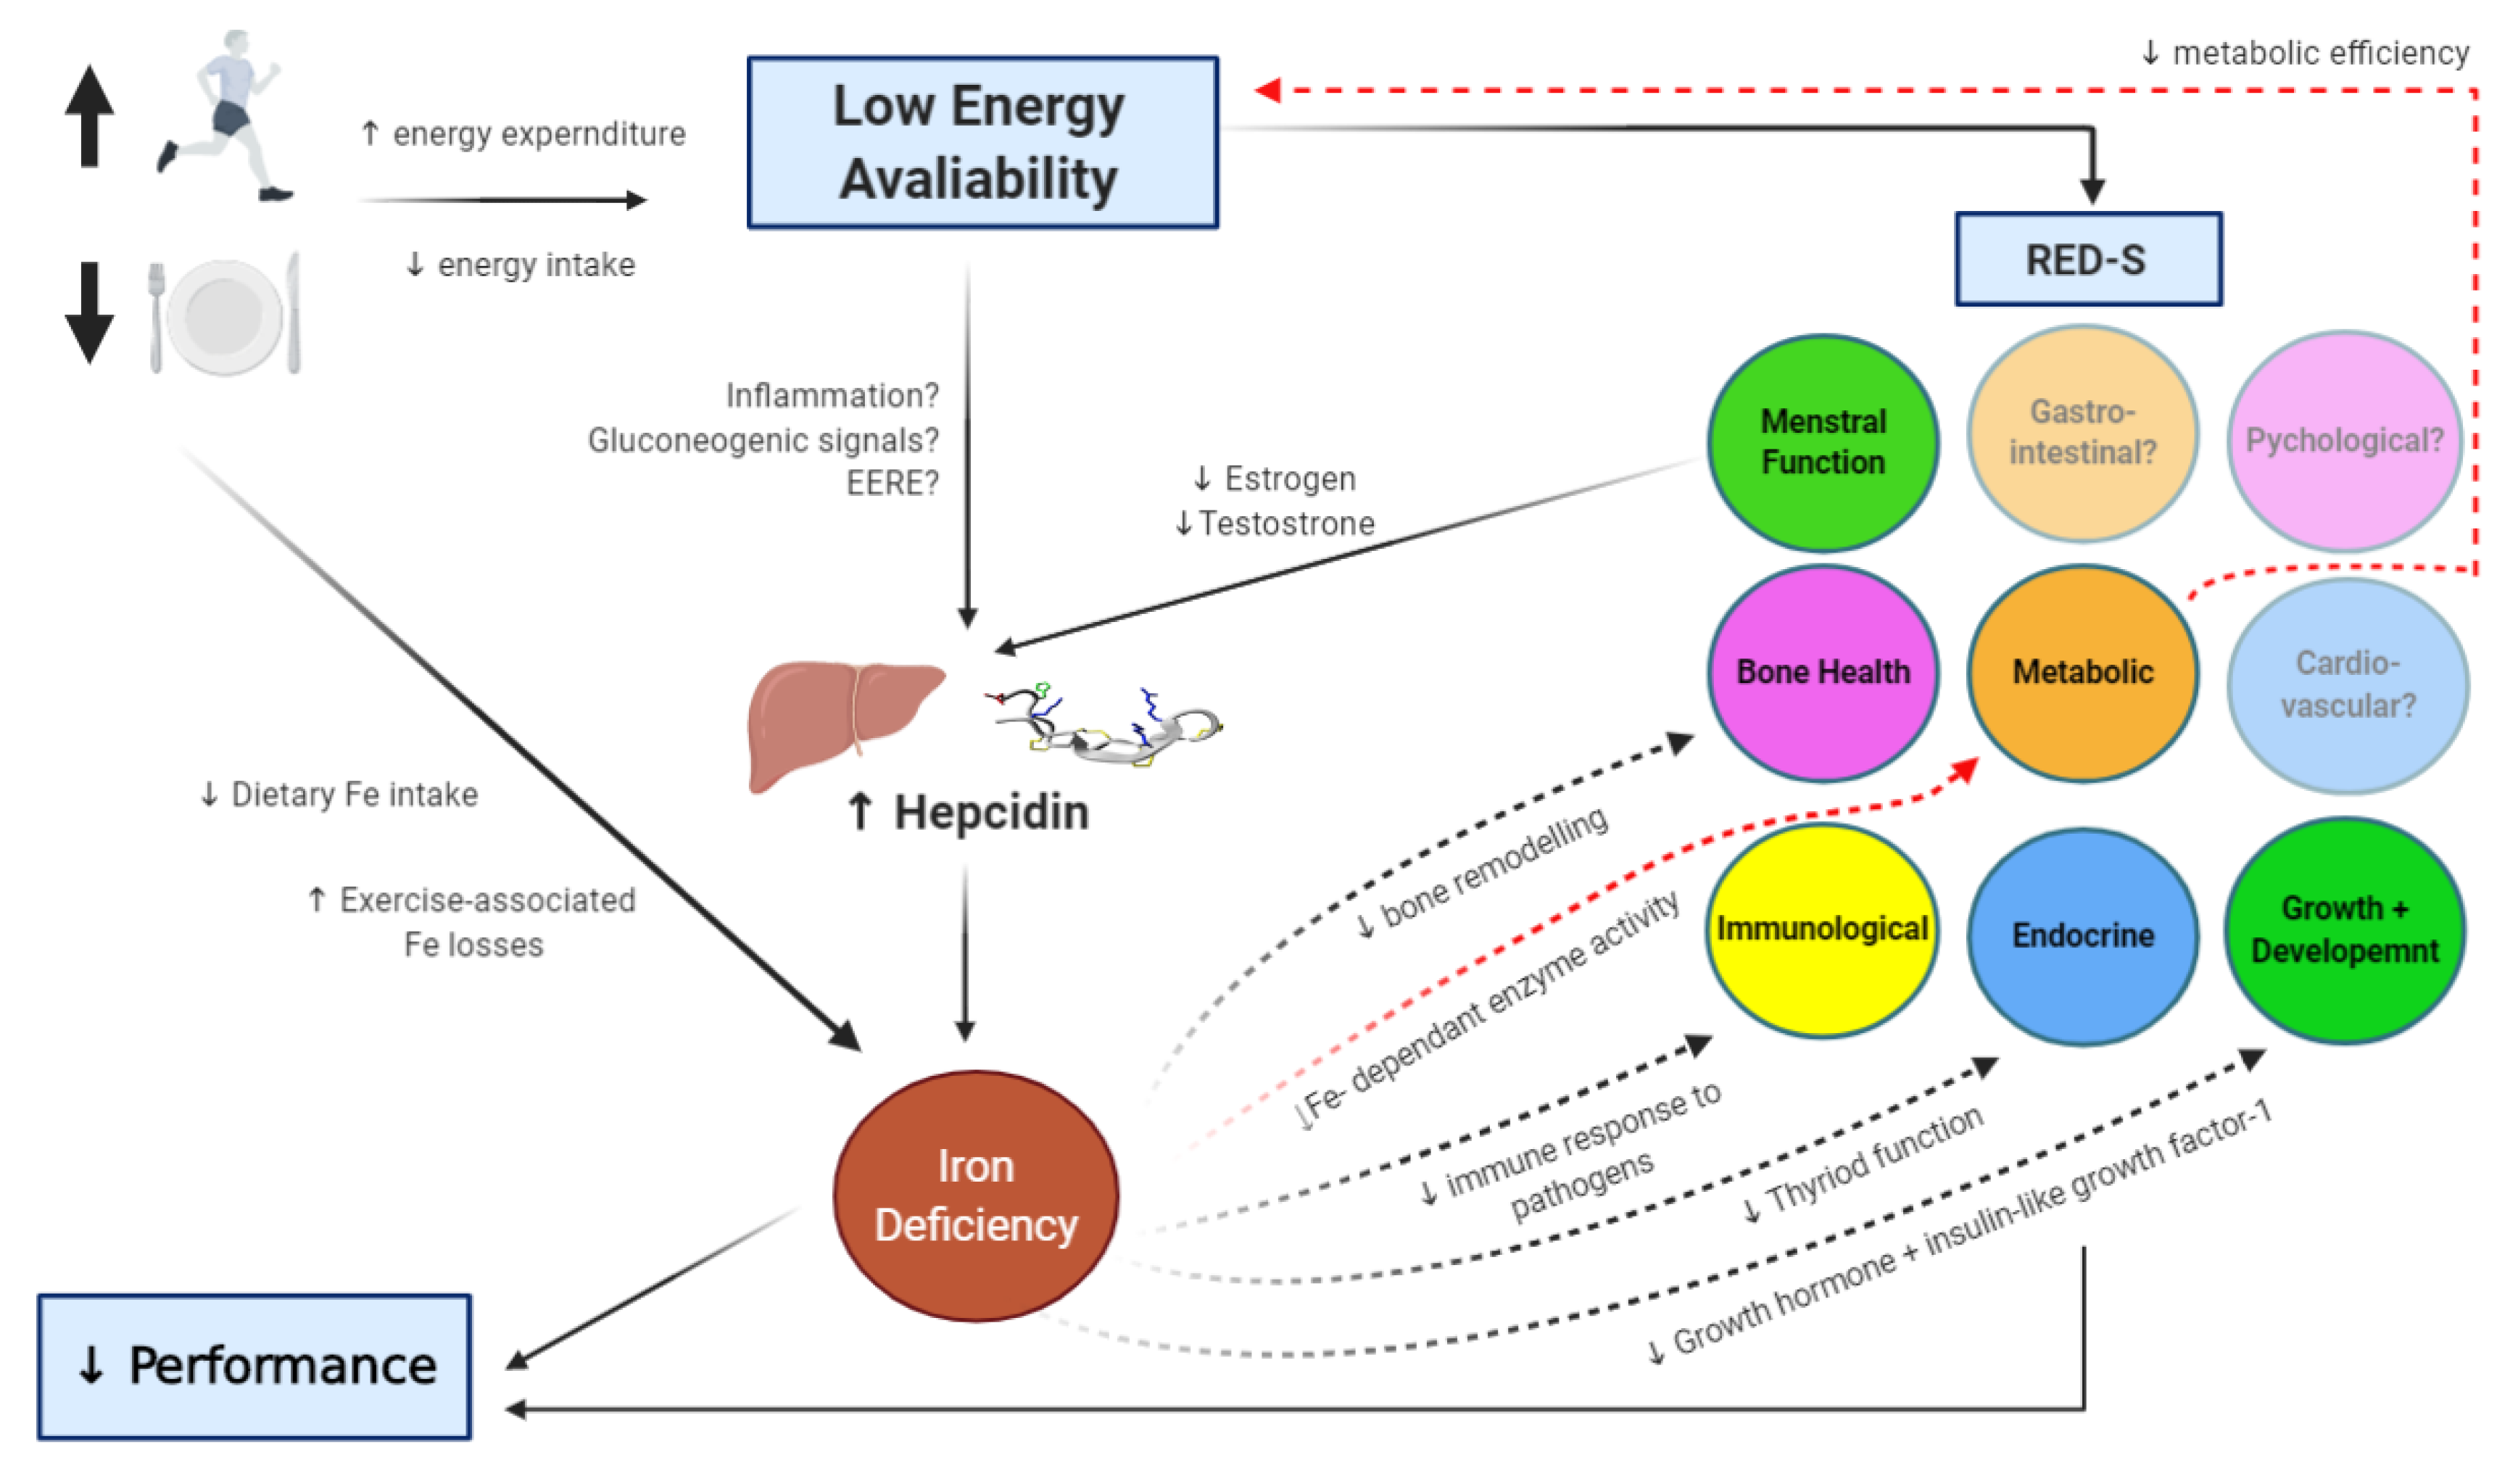 Energy metabolism and micronutrients